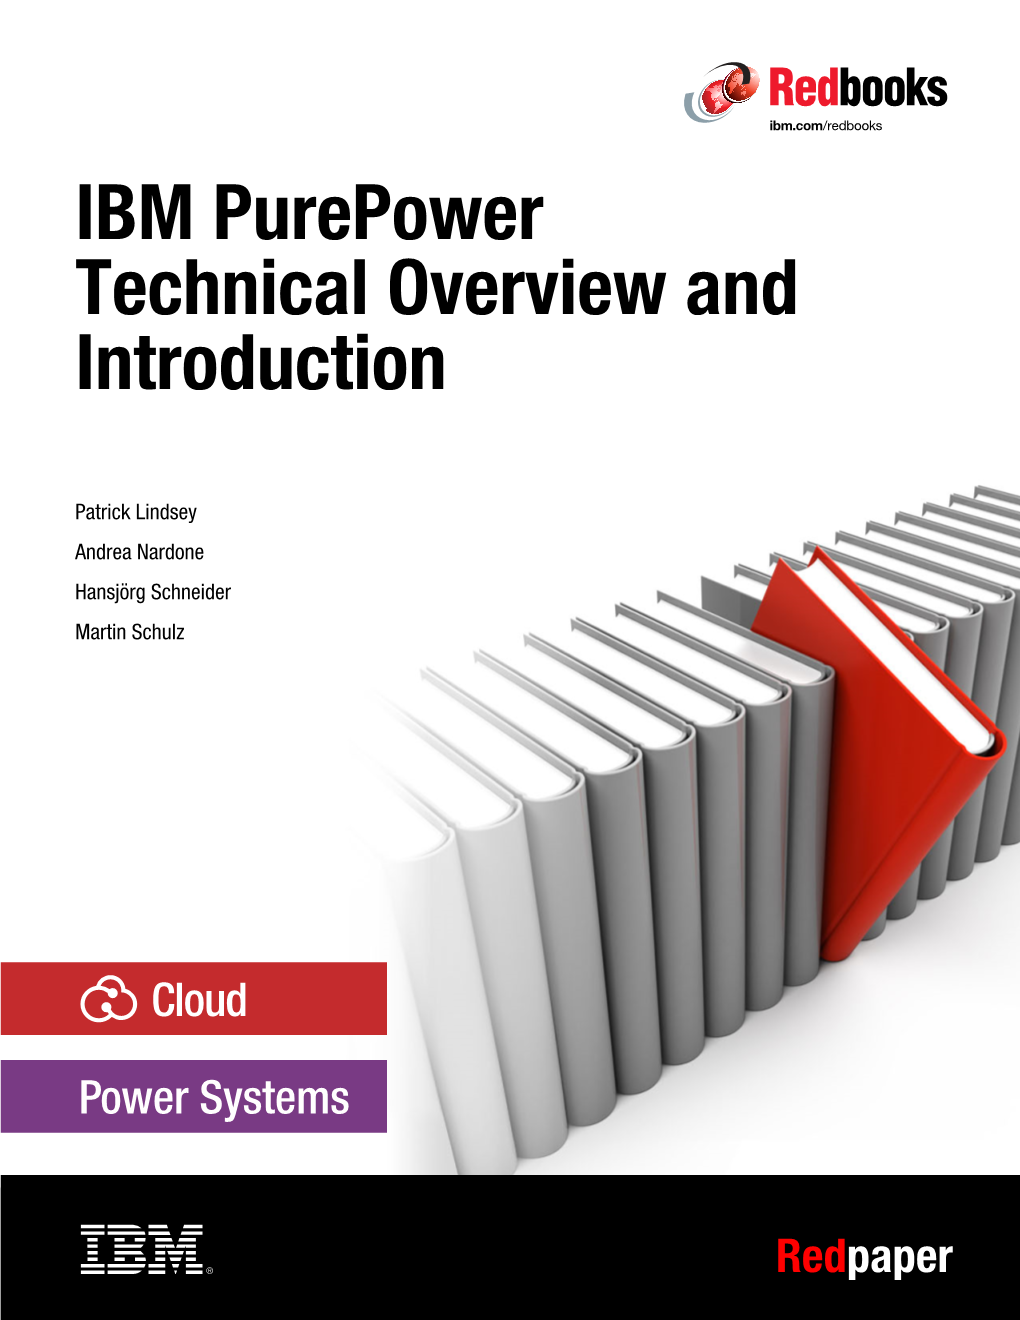 IBM Purepower Technical Overview and Introduction